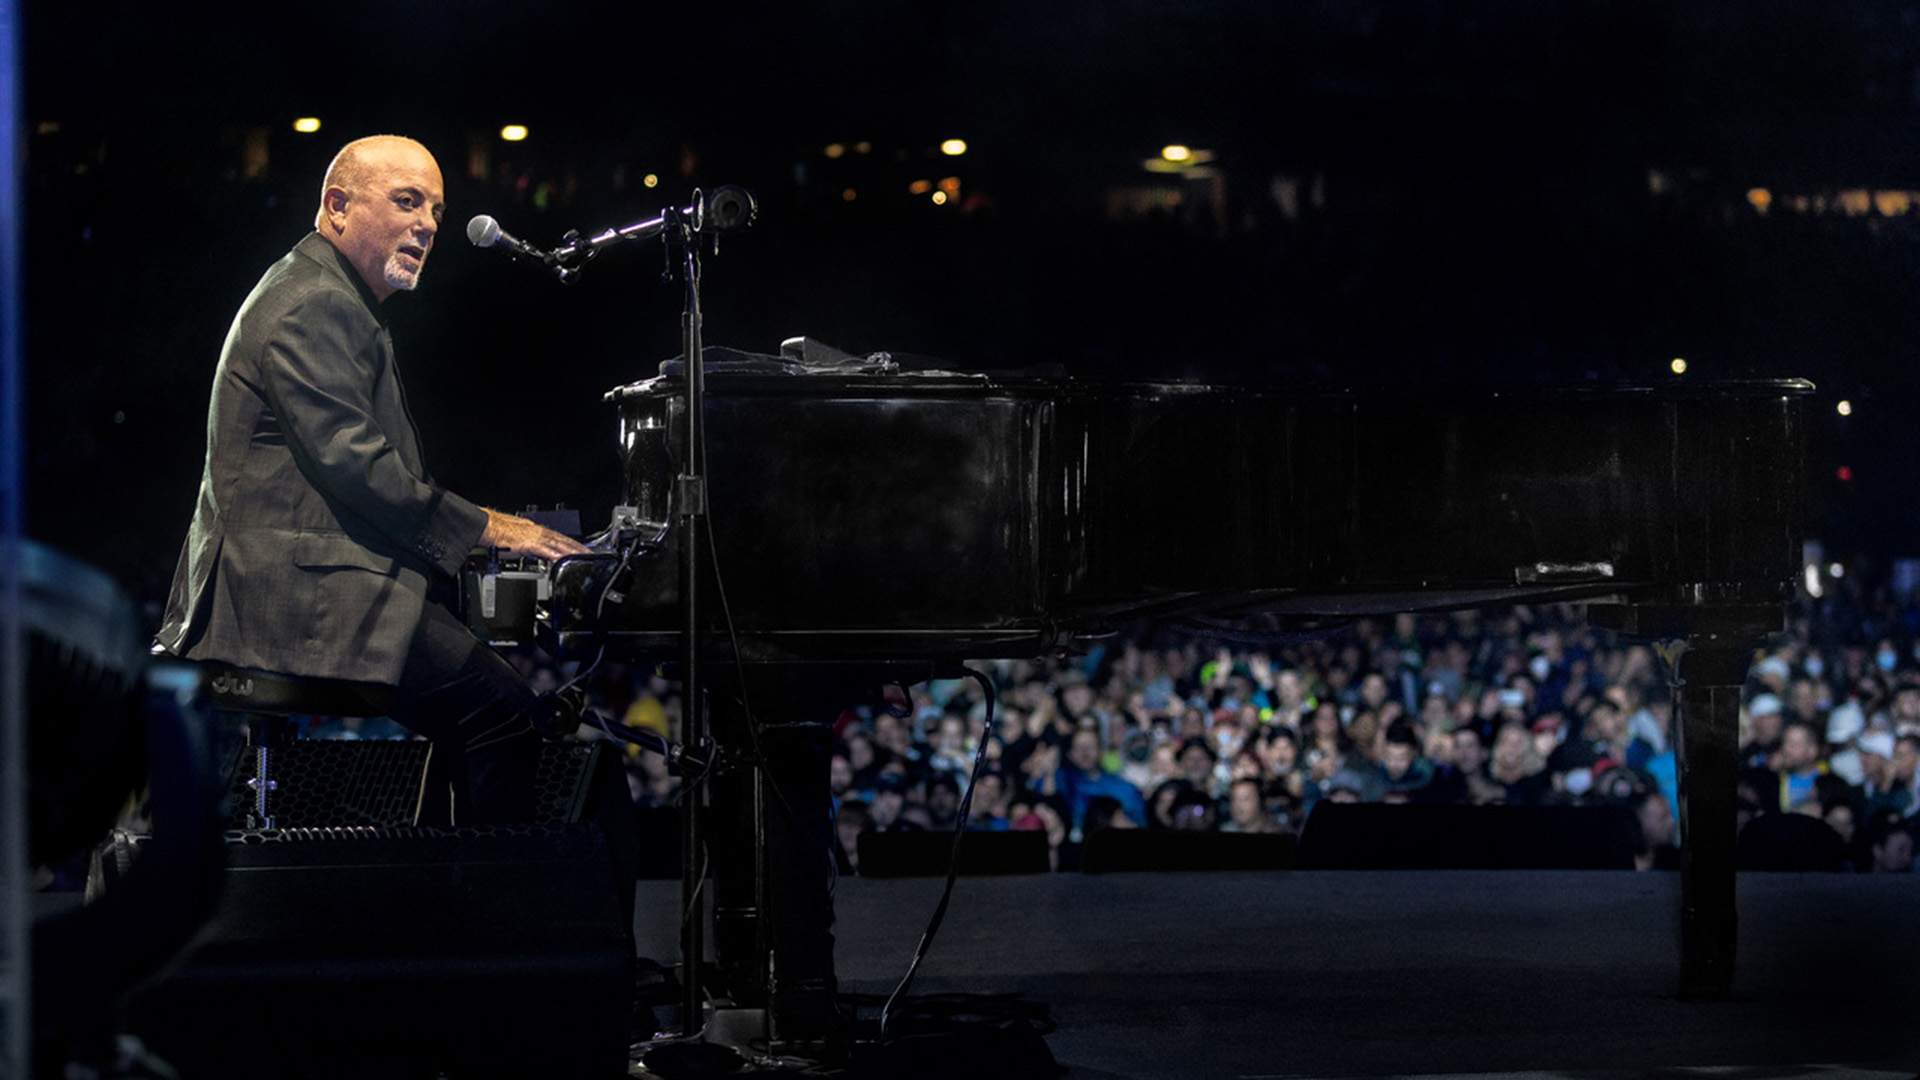 Billy Joel Is Coming to New Zealand This Summer Just for One Huge Concert at Eden Park